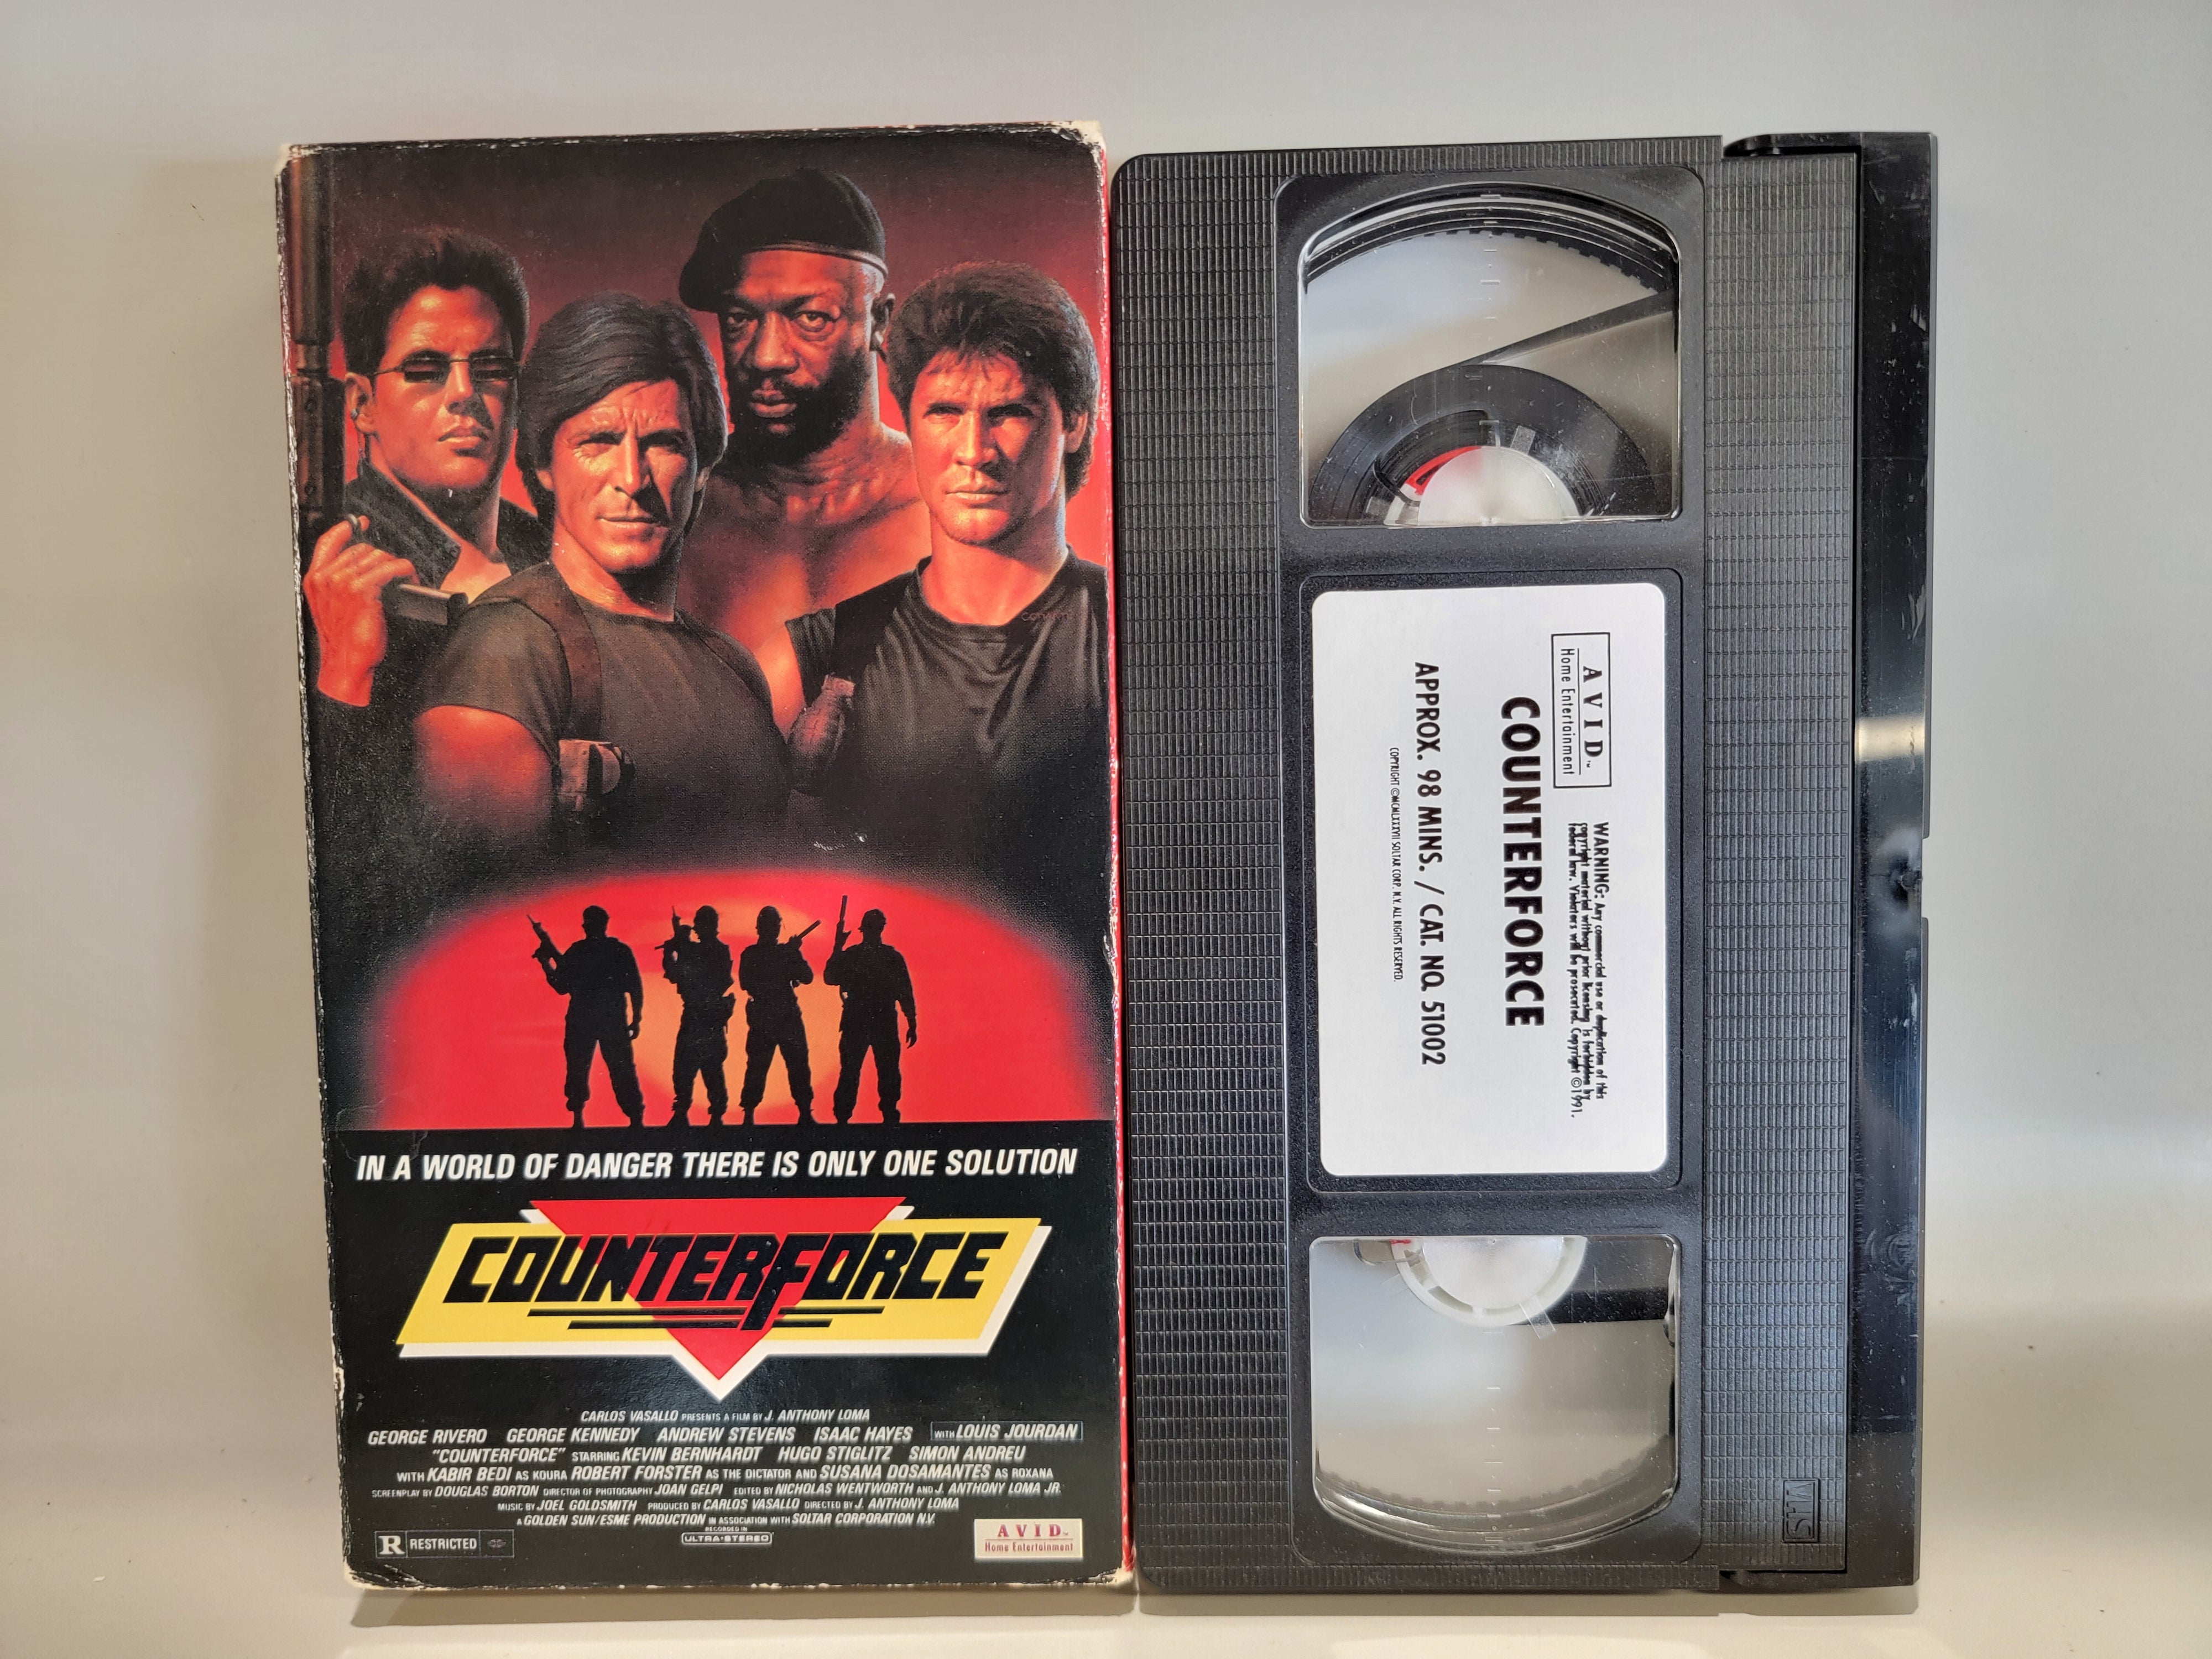 COUNTERFORCE VHS [USED]